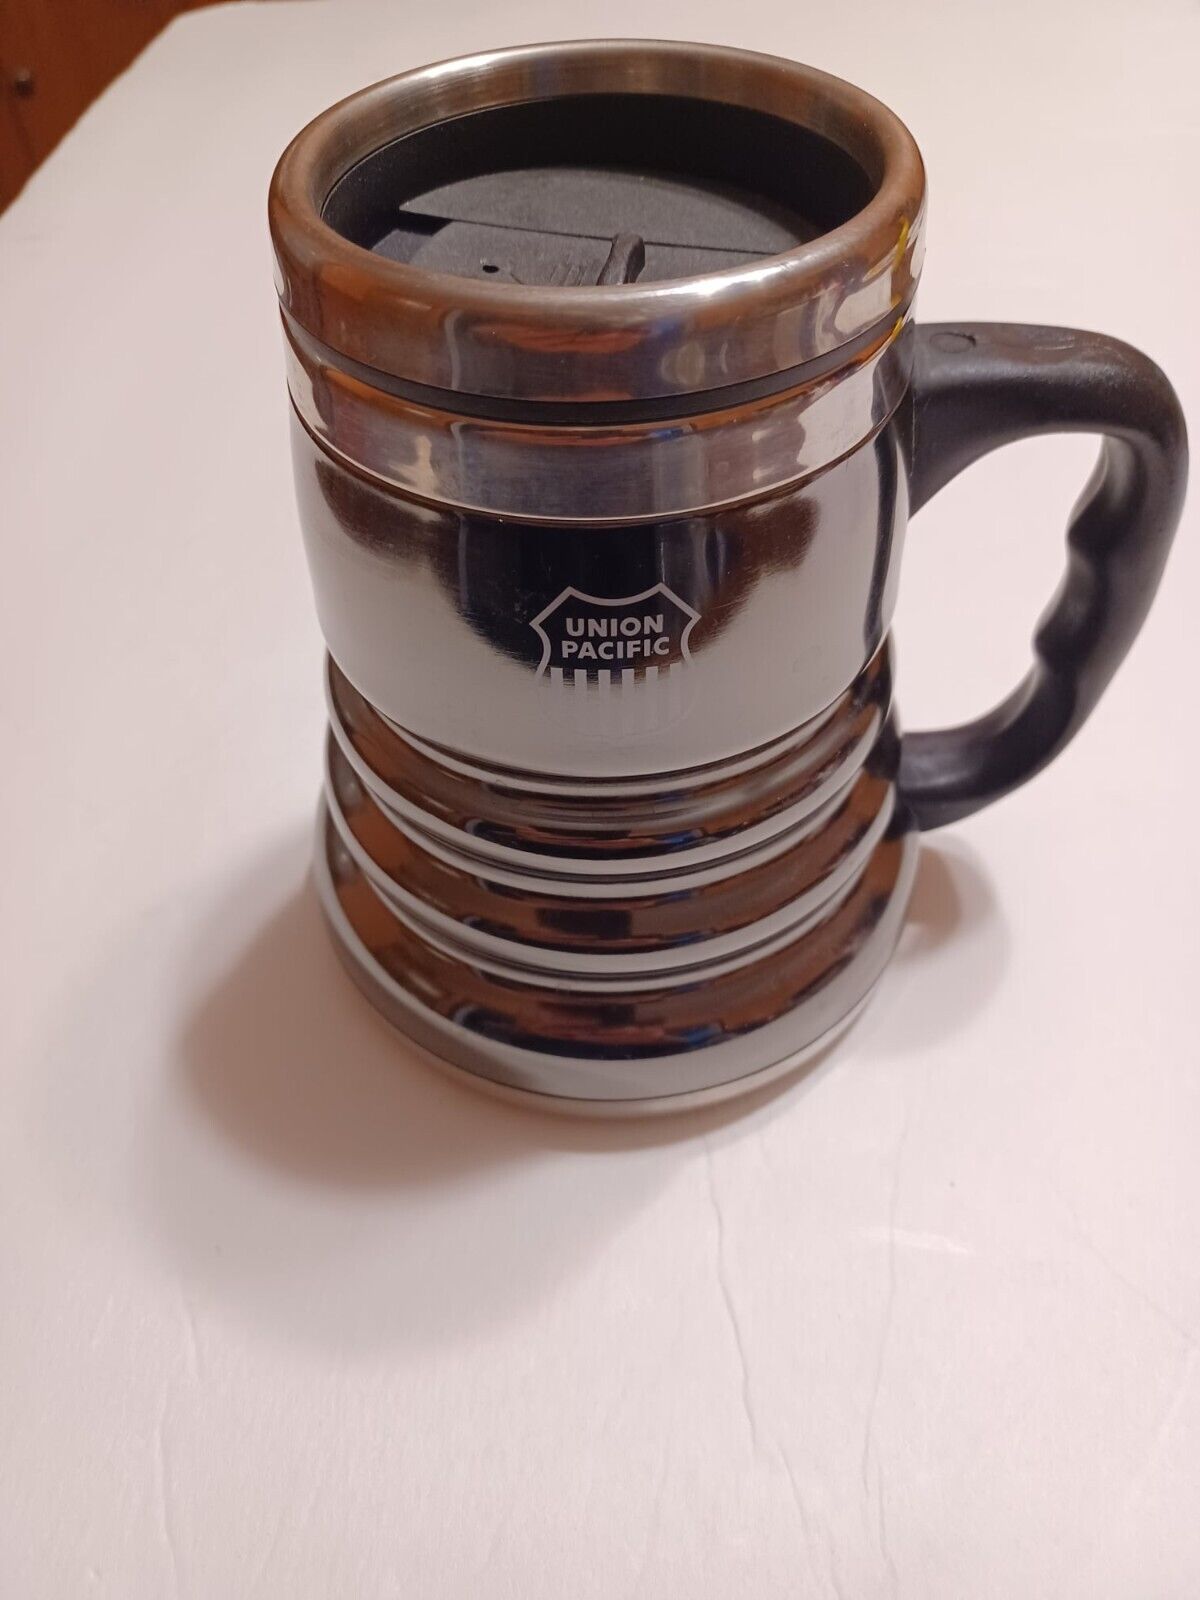 Union Pacific Railroad Stainless Stein Coffee Beverage Mug